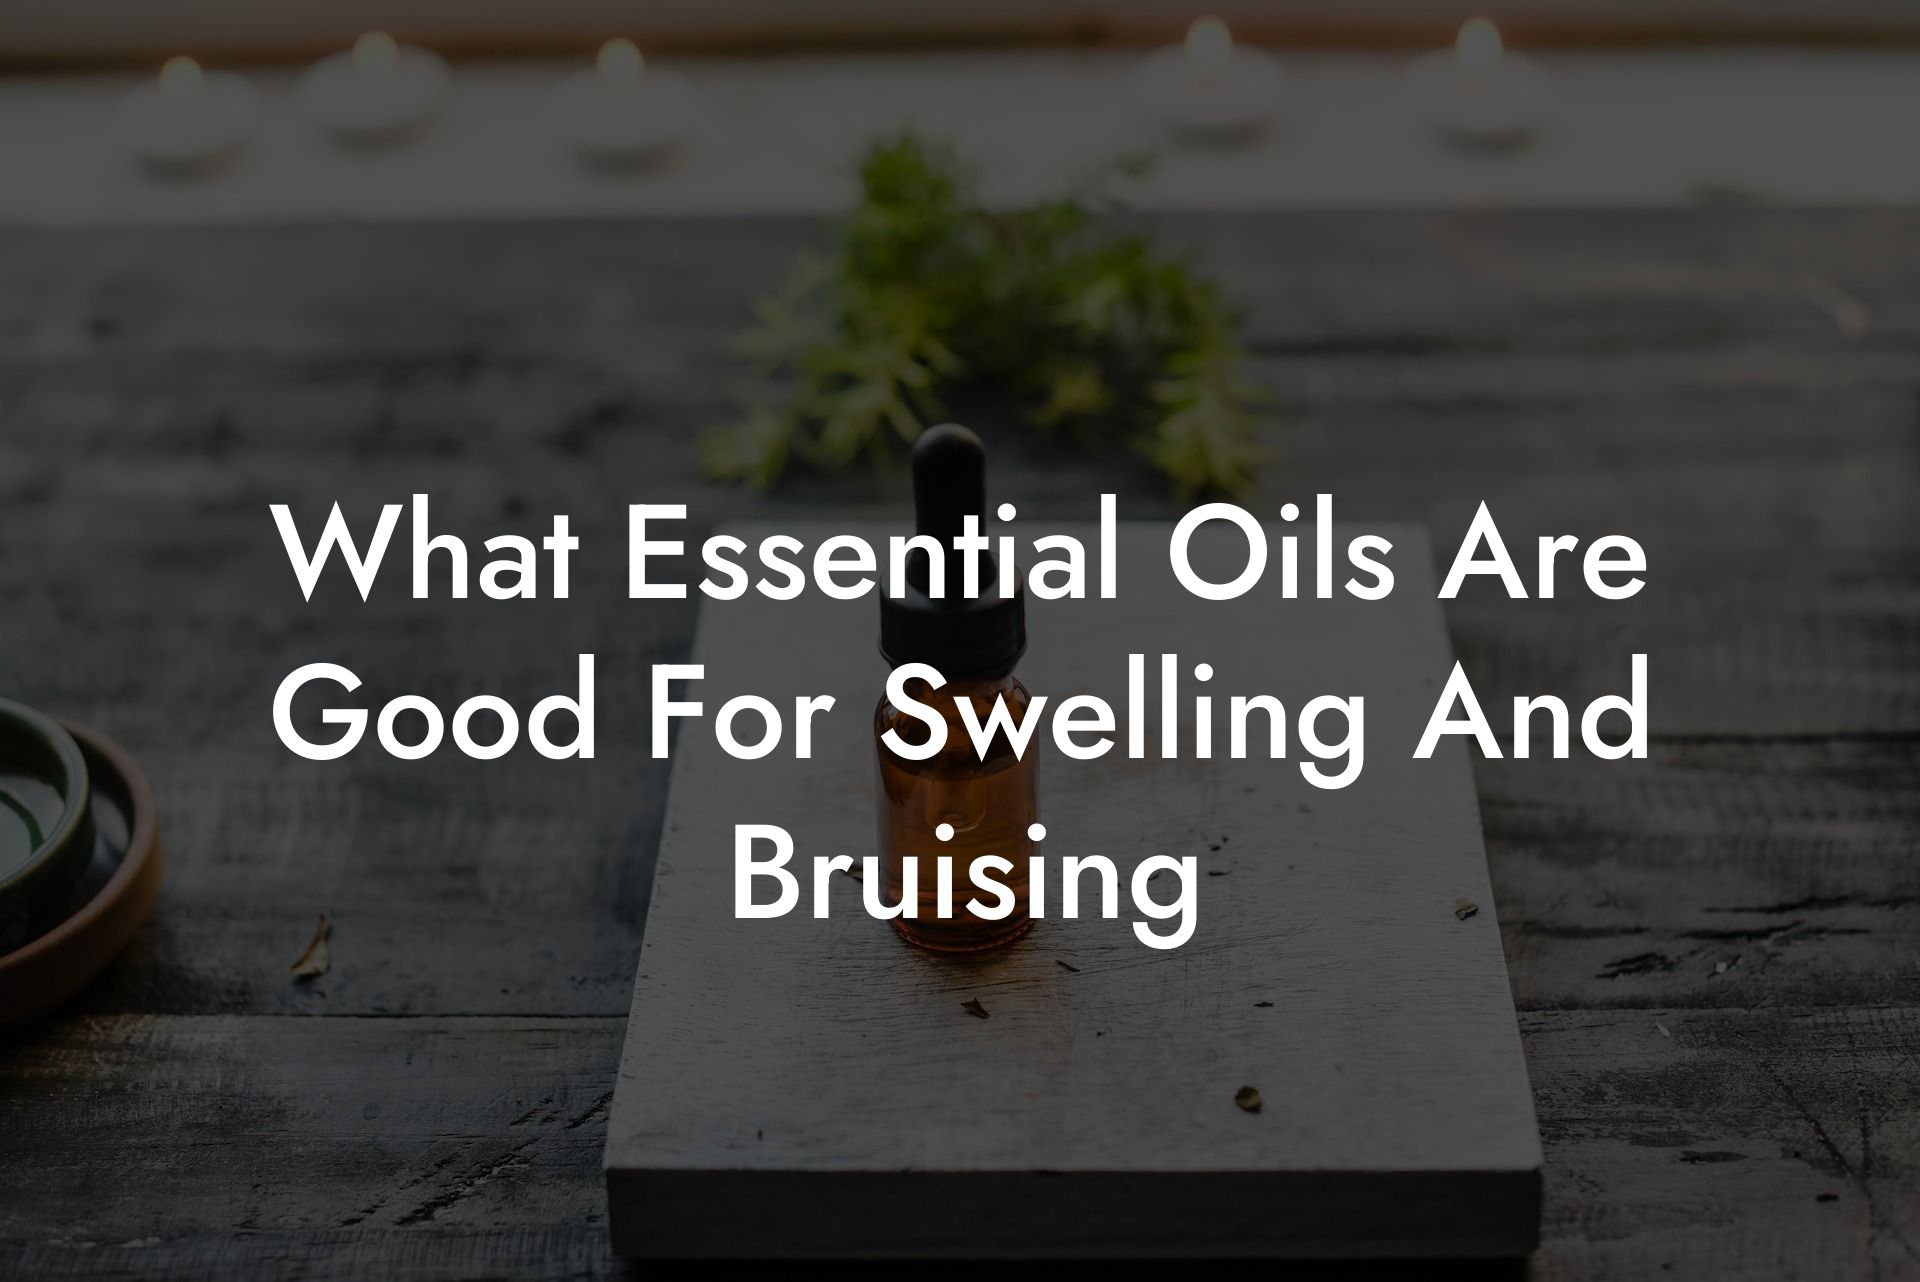 What Essential Oils Are Good For Swelling And Bruising